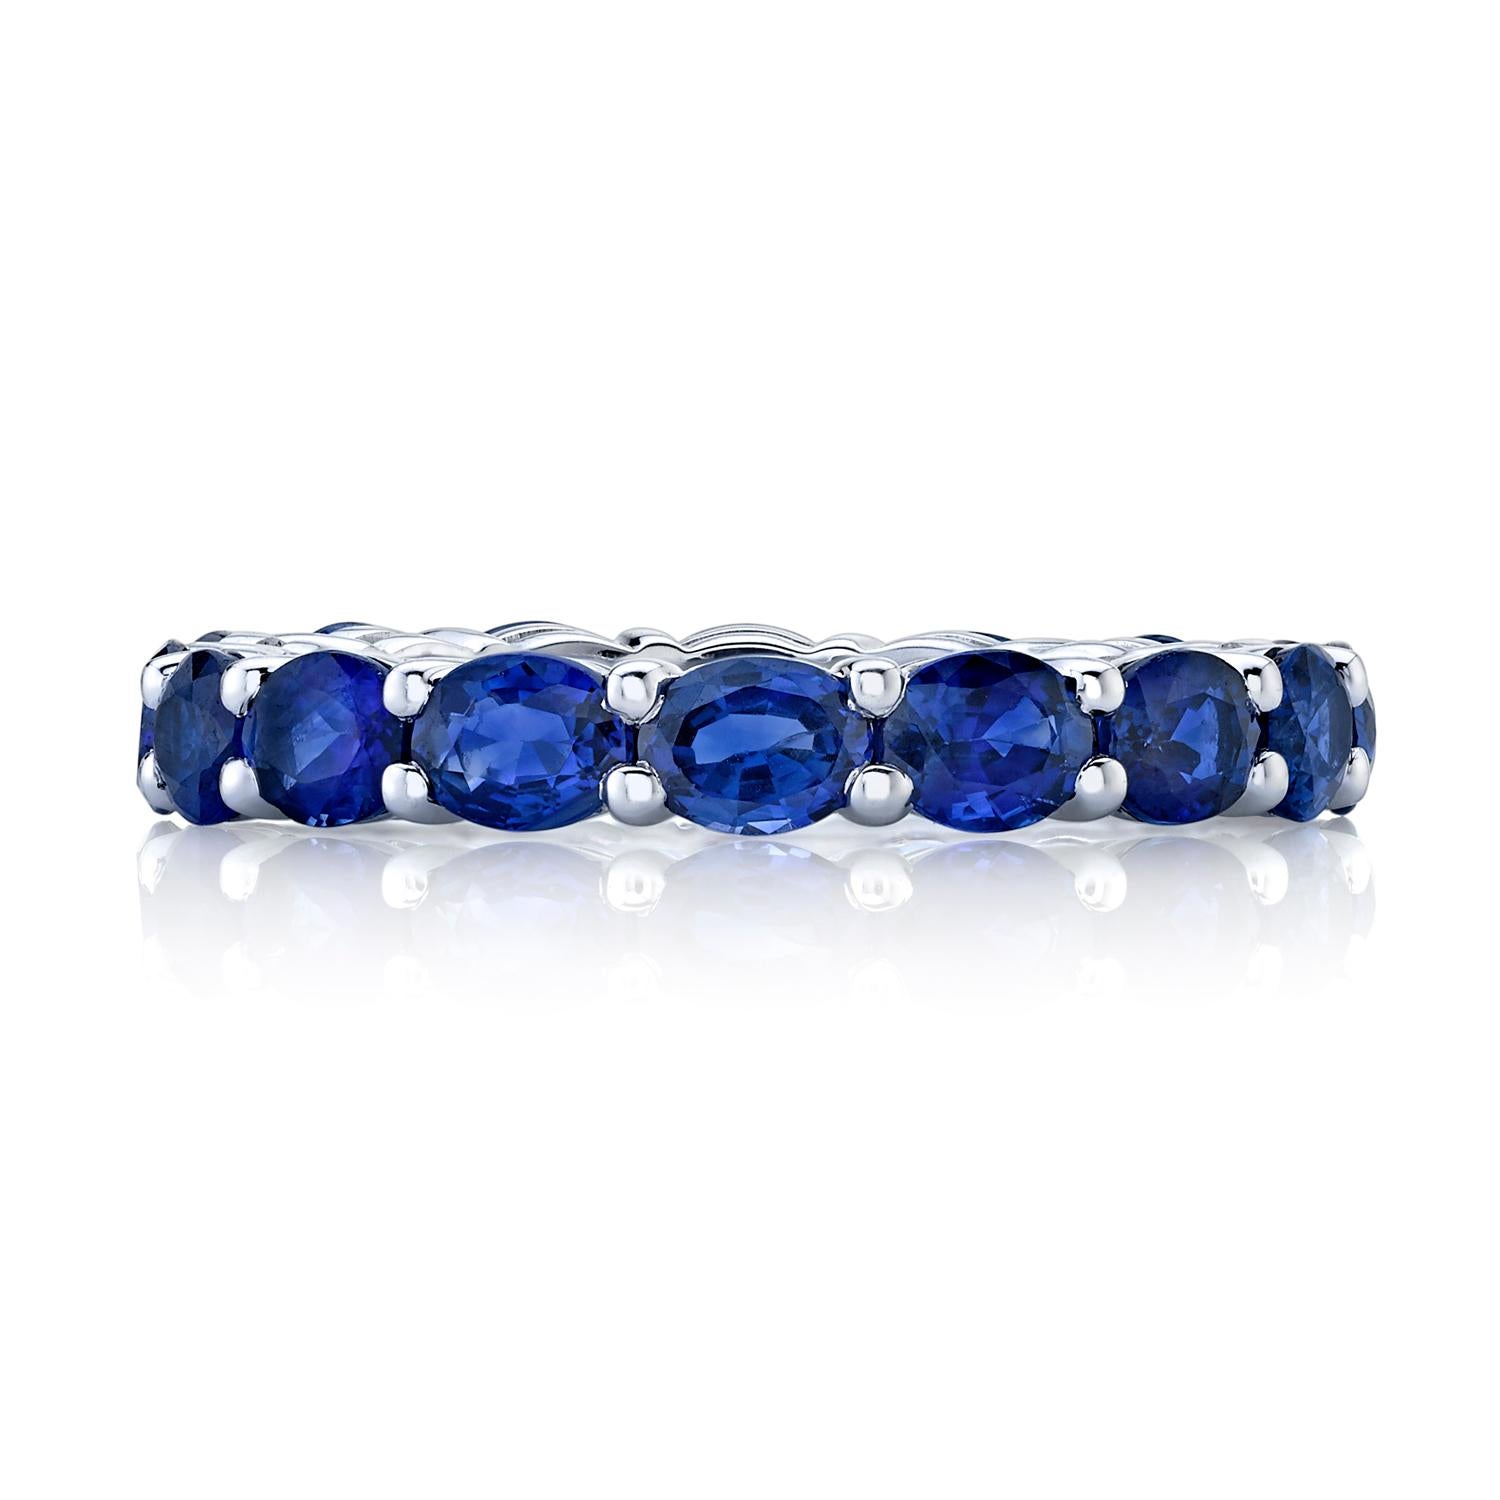 Oval shaped blue sapphires set in 18k white gold eternity band. 
16 total stones 
Carat total weight 3.85 
Ring size 6.5